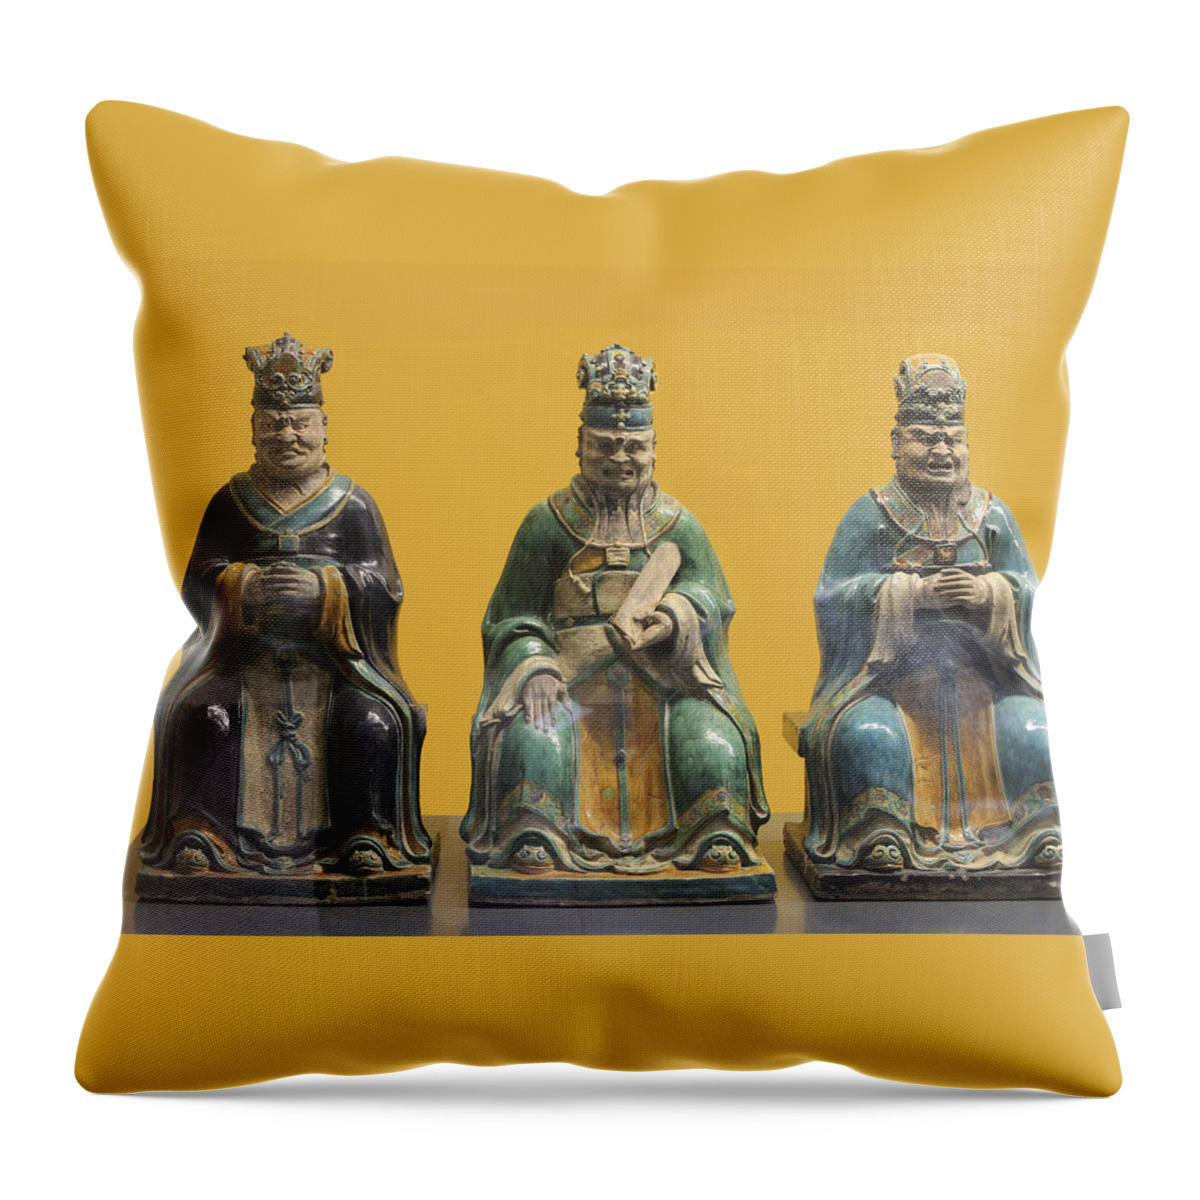 Oriental Figurines Throw Pillow featuring the photograph Oriental Figurines Series 79 by Carlos Diaz